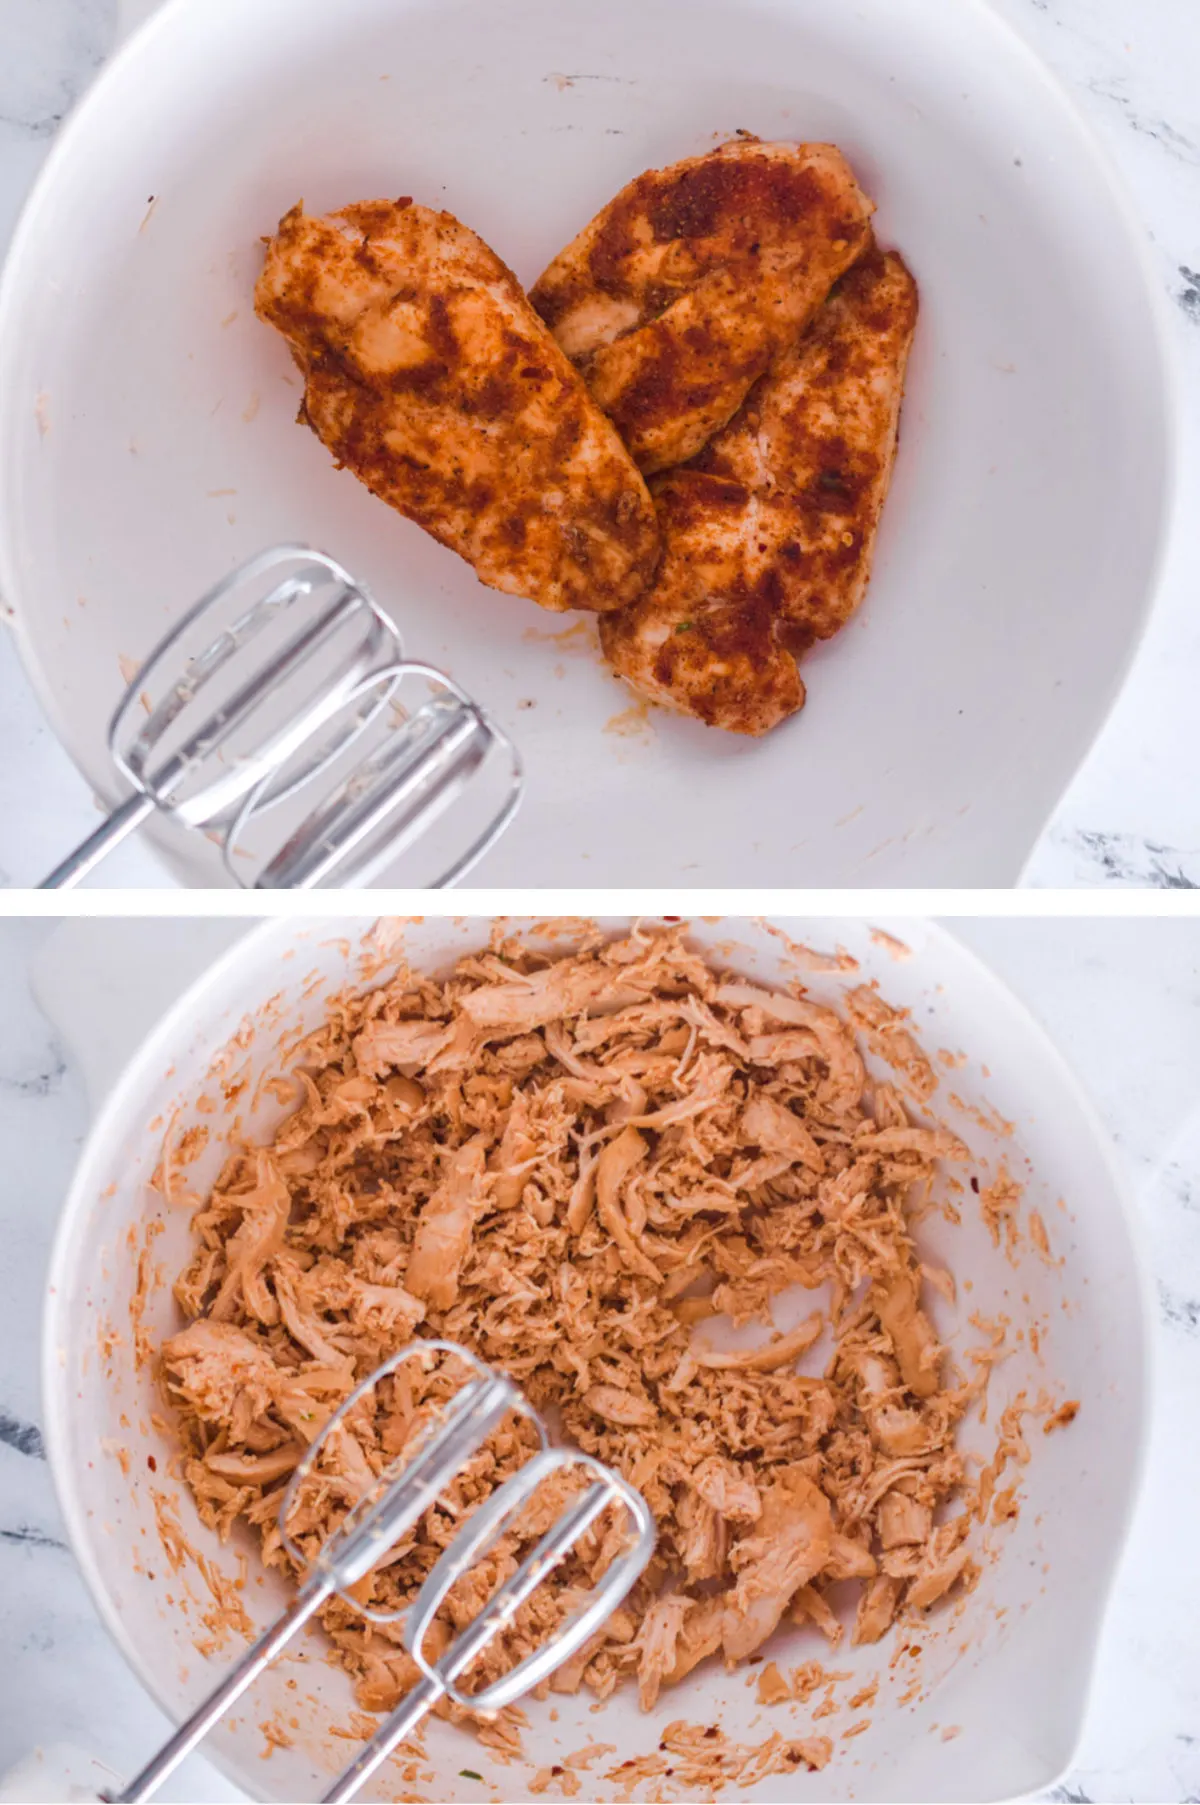 Two overhead images in one: 1. Chicken breasts are in a white plastic bowl. 2. Chicken breasts are shredded with hand mixer. 